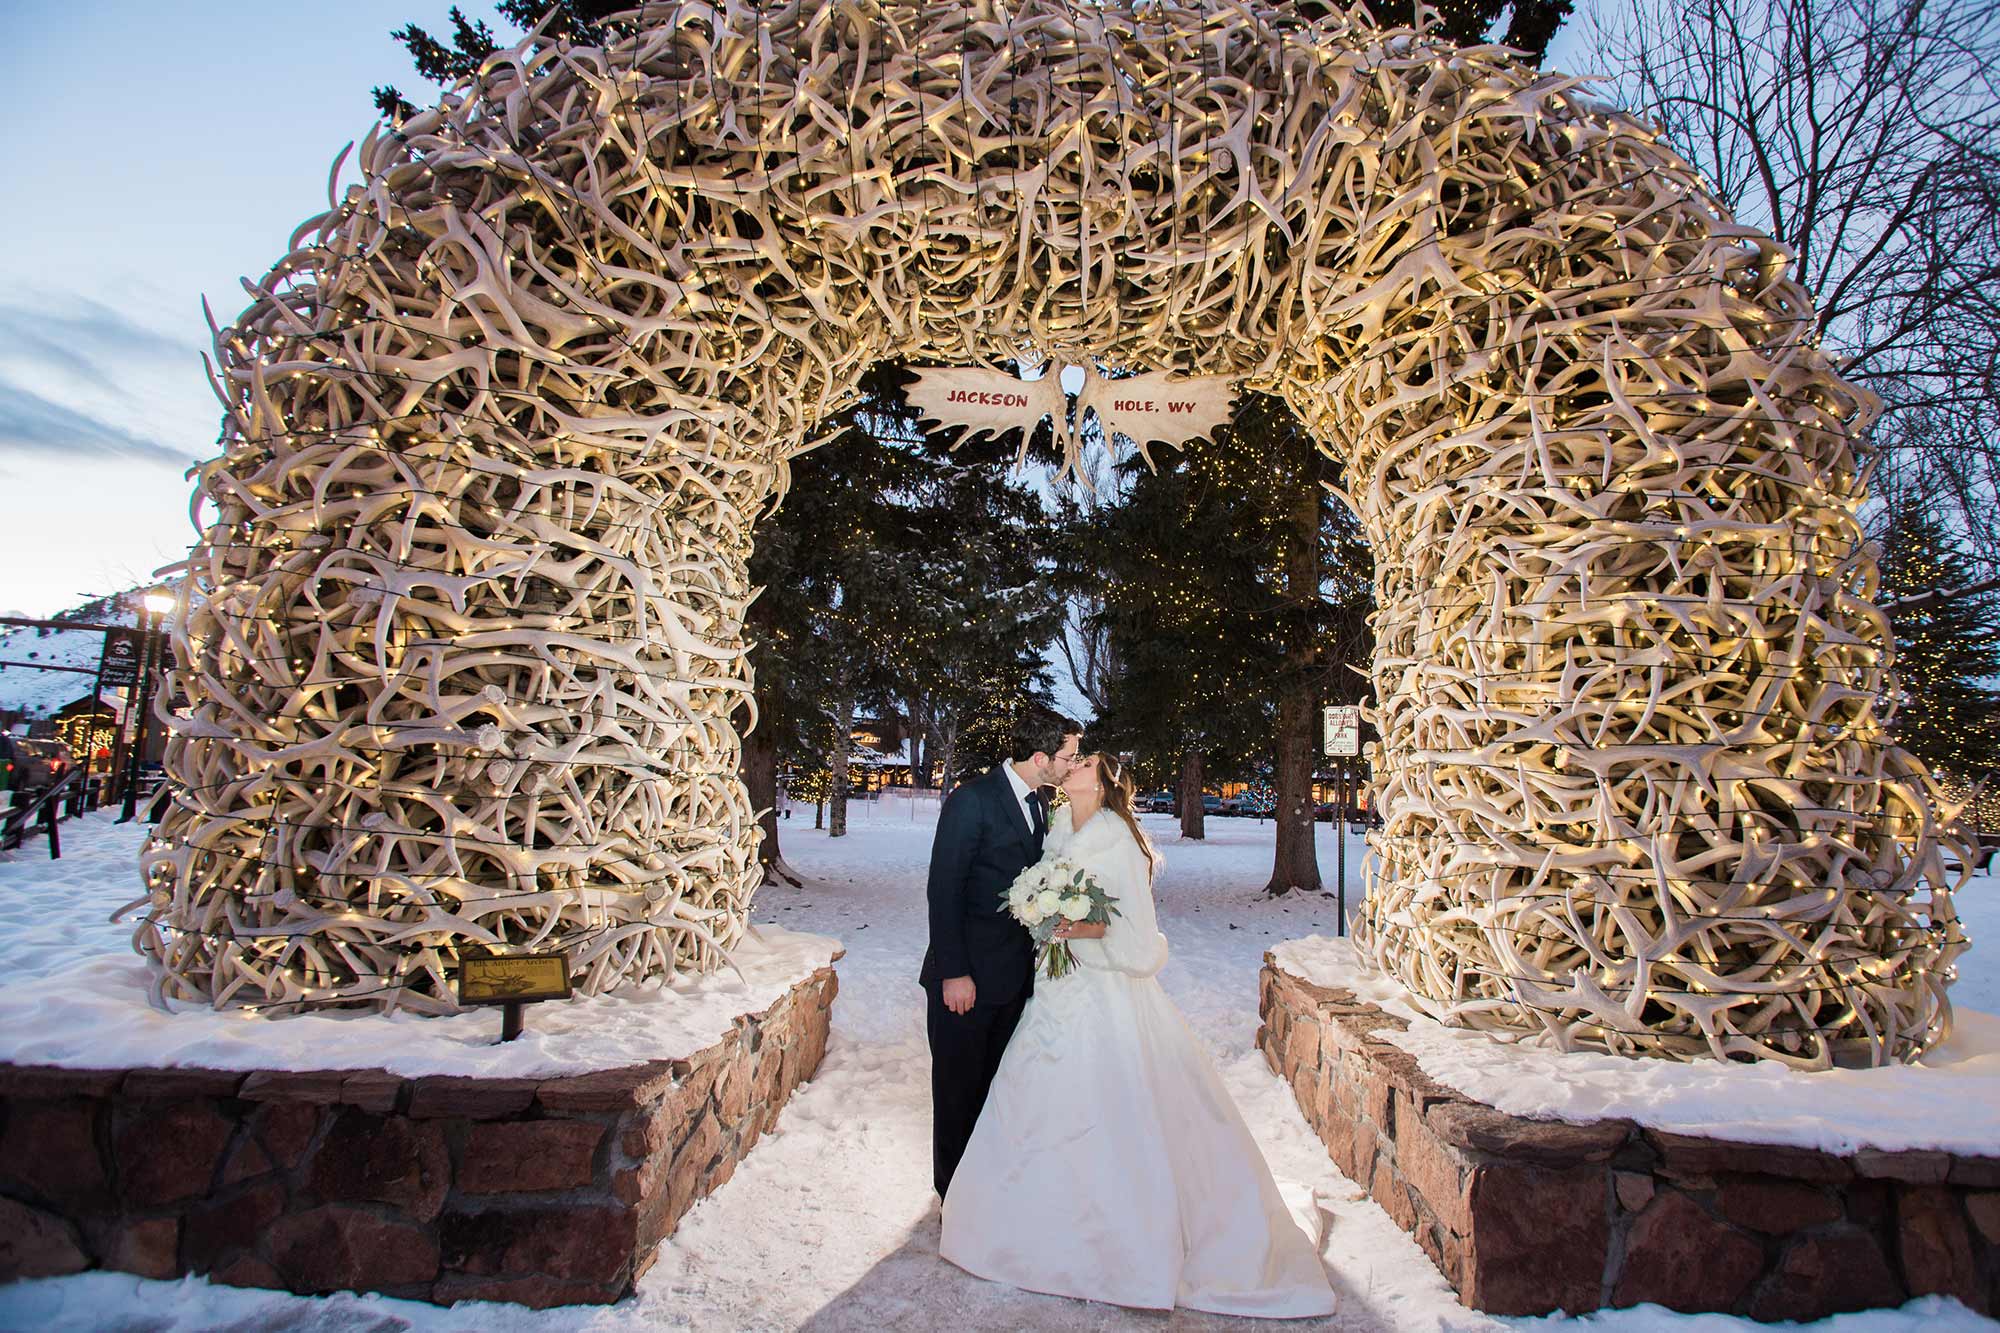 Winter-Wedding-in-Jackson under Town Square antler arch with white lights and snow